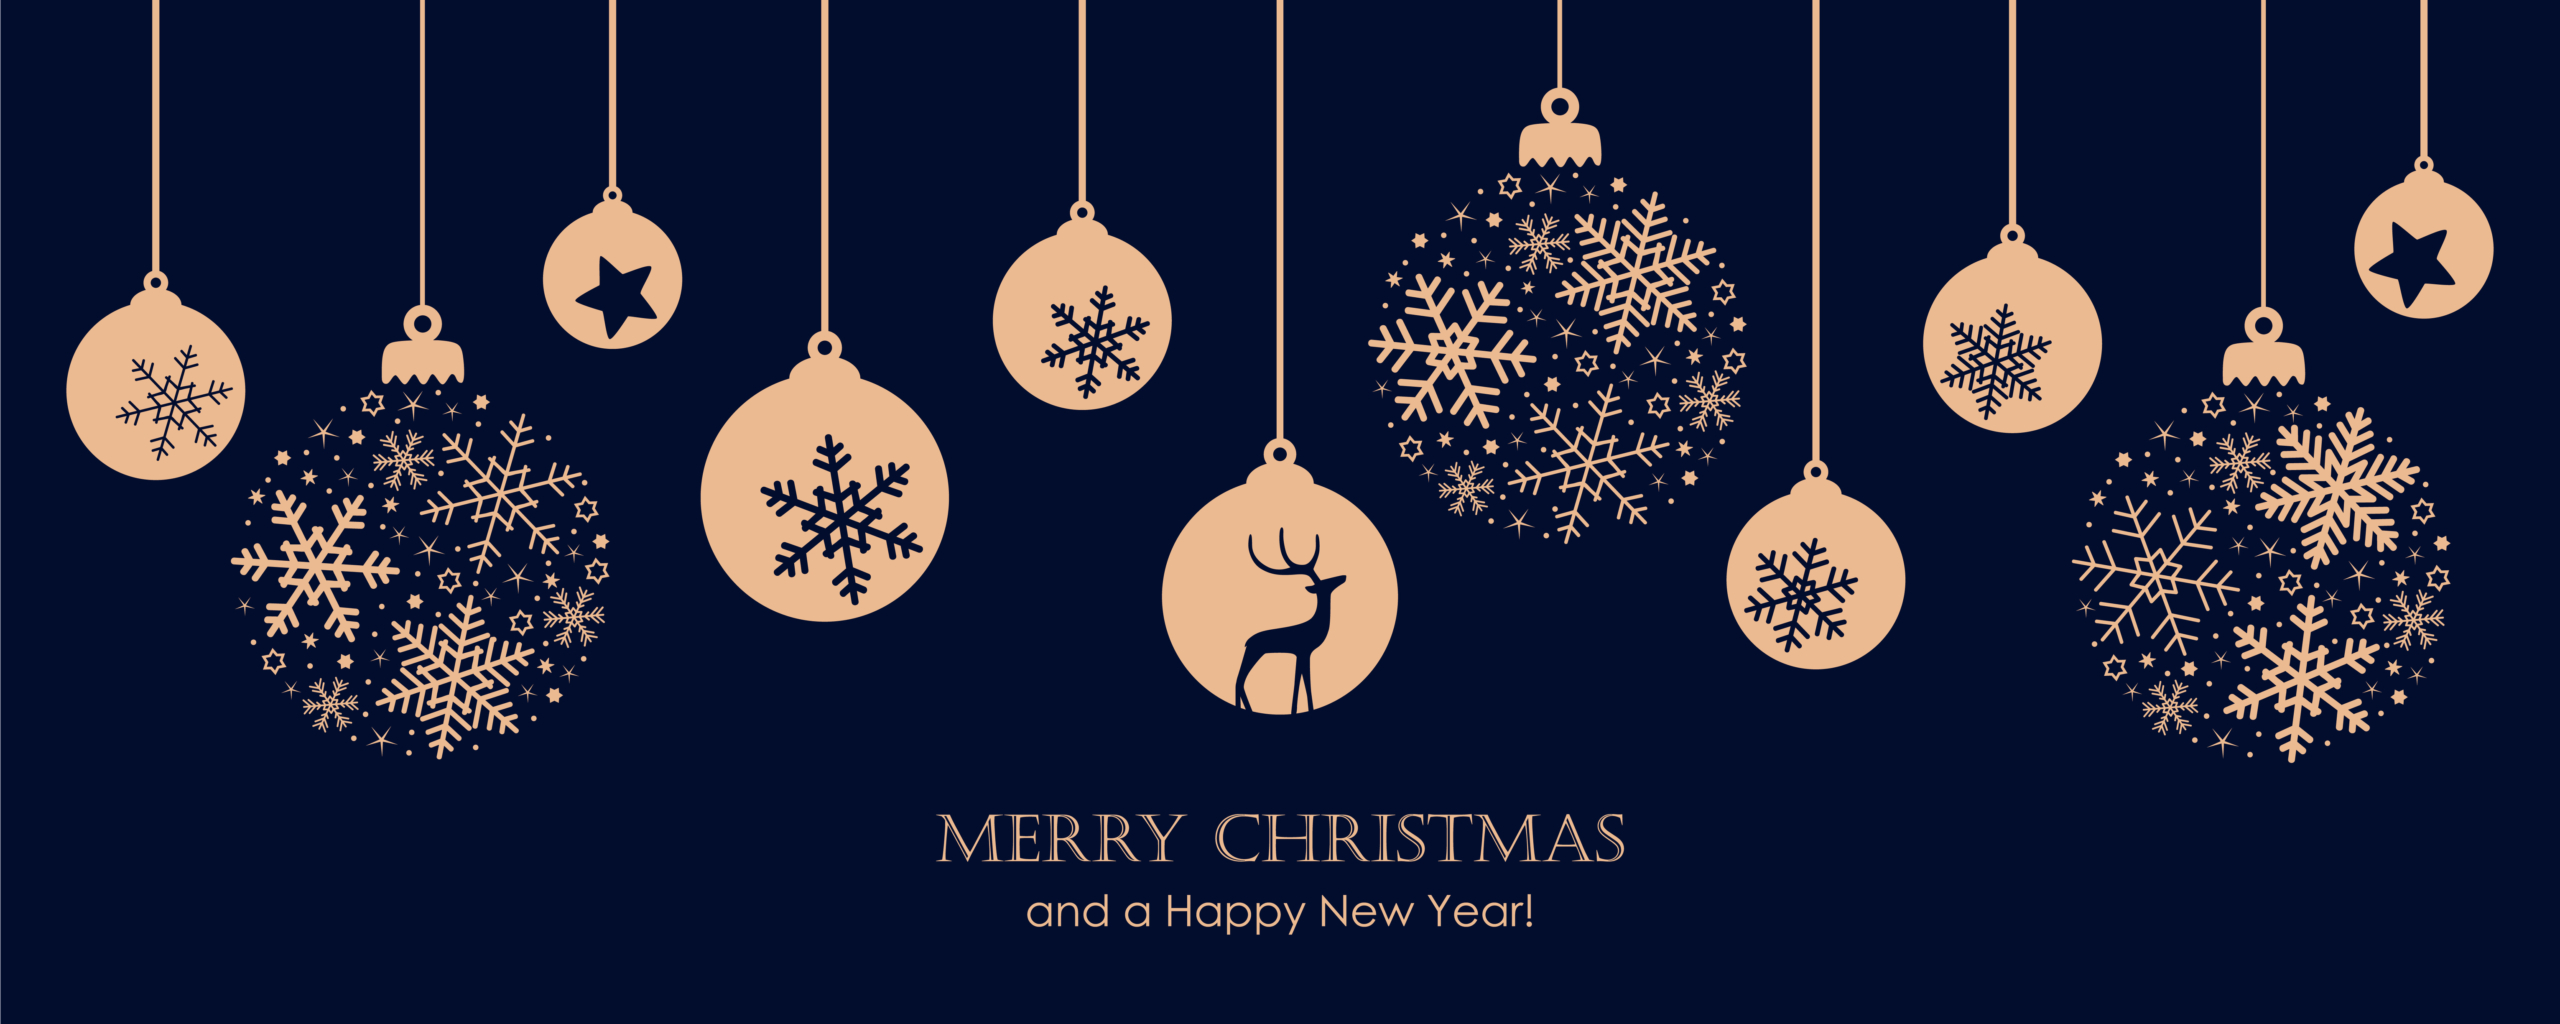 From the team at MPG, best wishes for the festive season and a Happy New Year.